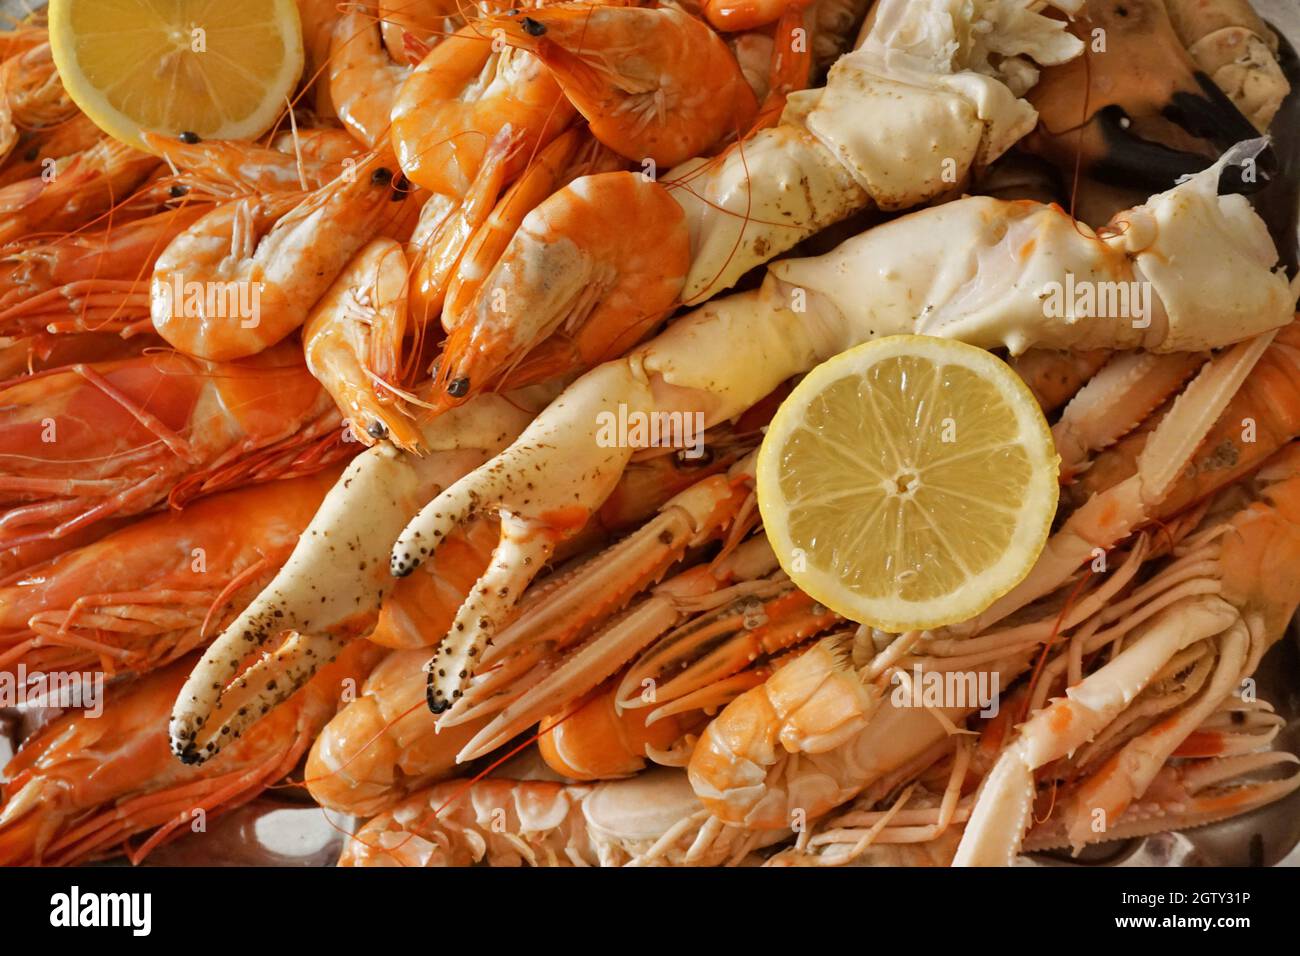 Full Frame Shot Of Seafood With Lemons Stock Photo